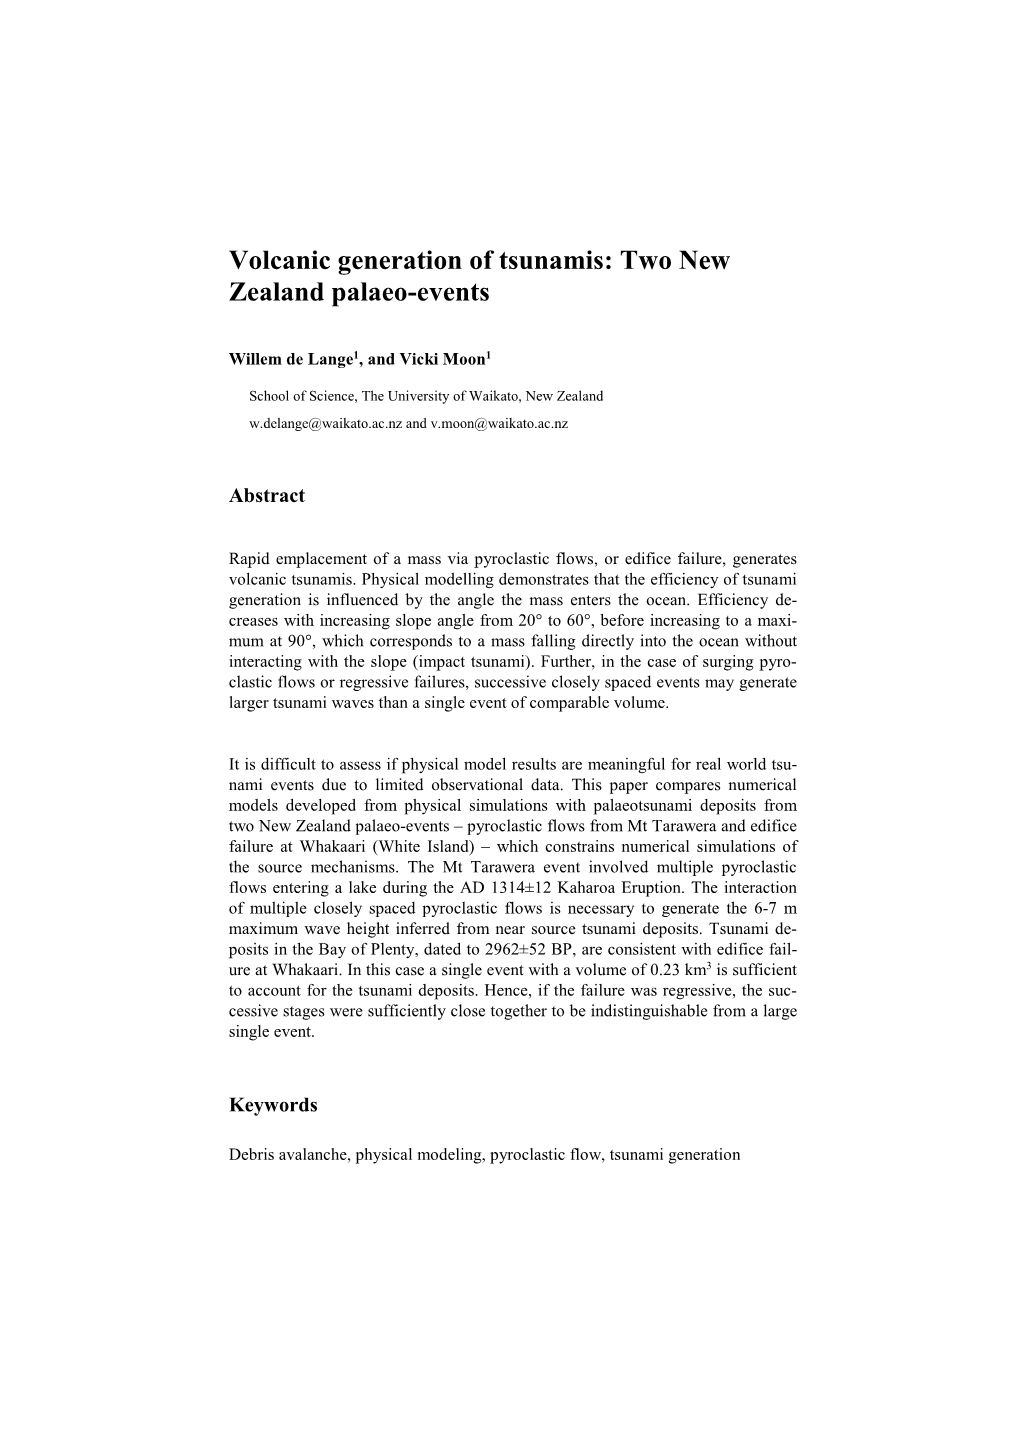 Volcanic Generation of Tsunamis: Two New Zealand Palaeo-Events